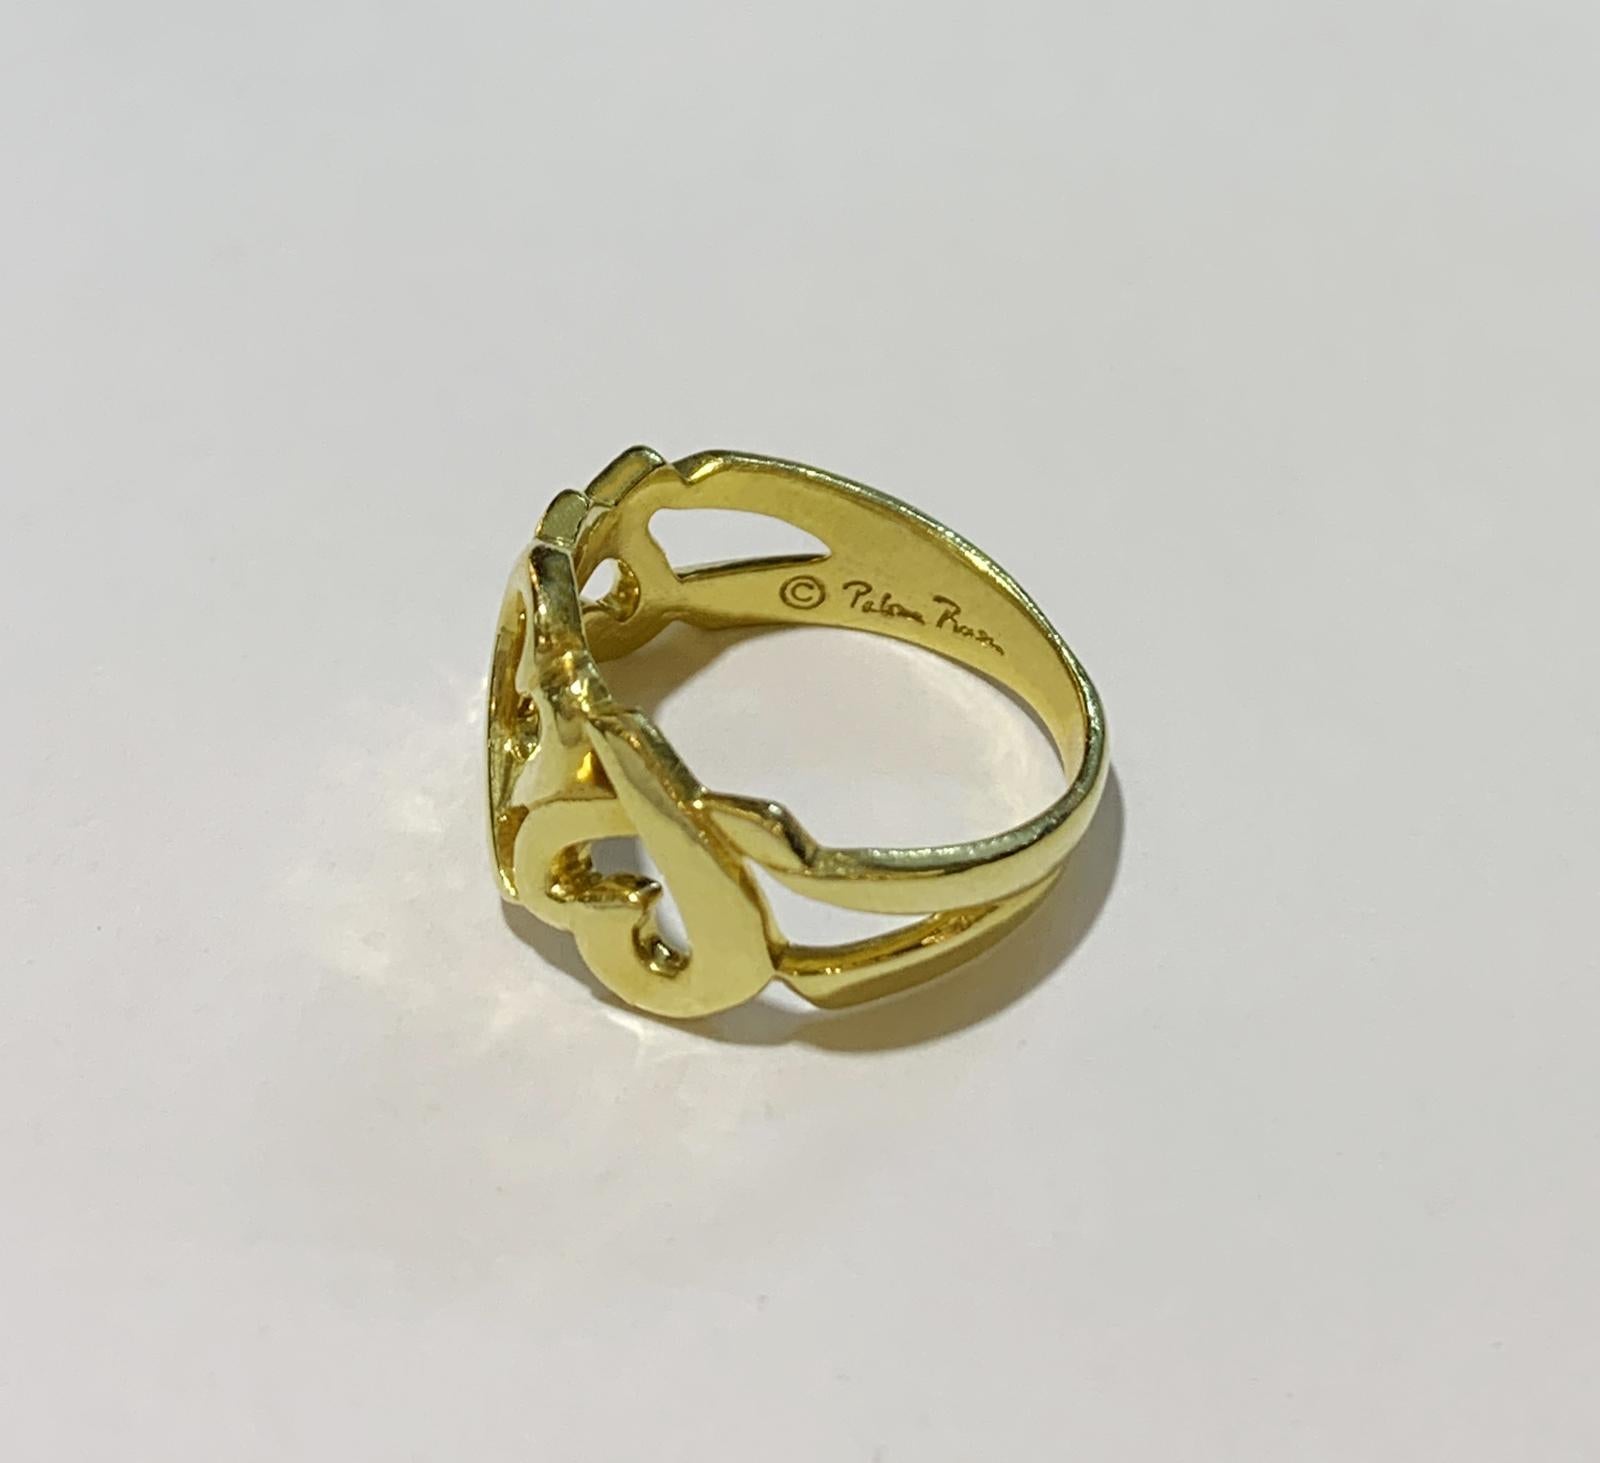 TIFFANY & CO. PALOMA PICASSO 18KT LOVING HEART RING.

-Good condition
-18k yellow gold
-Ring size: 4
-Weight: 3.7gr

*Comes with Tiffany pouch.